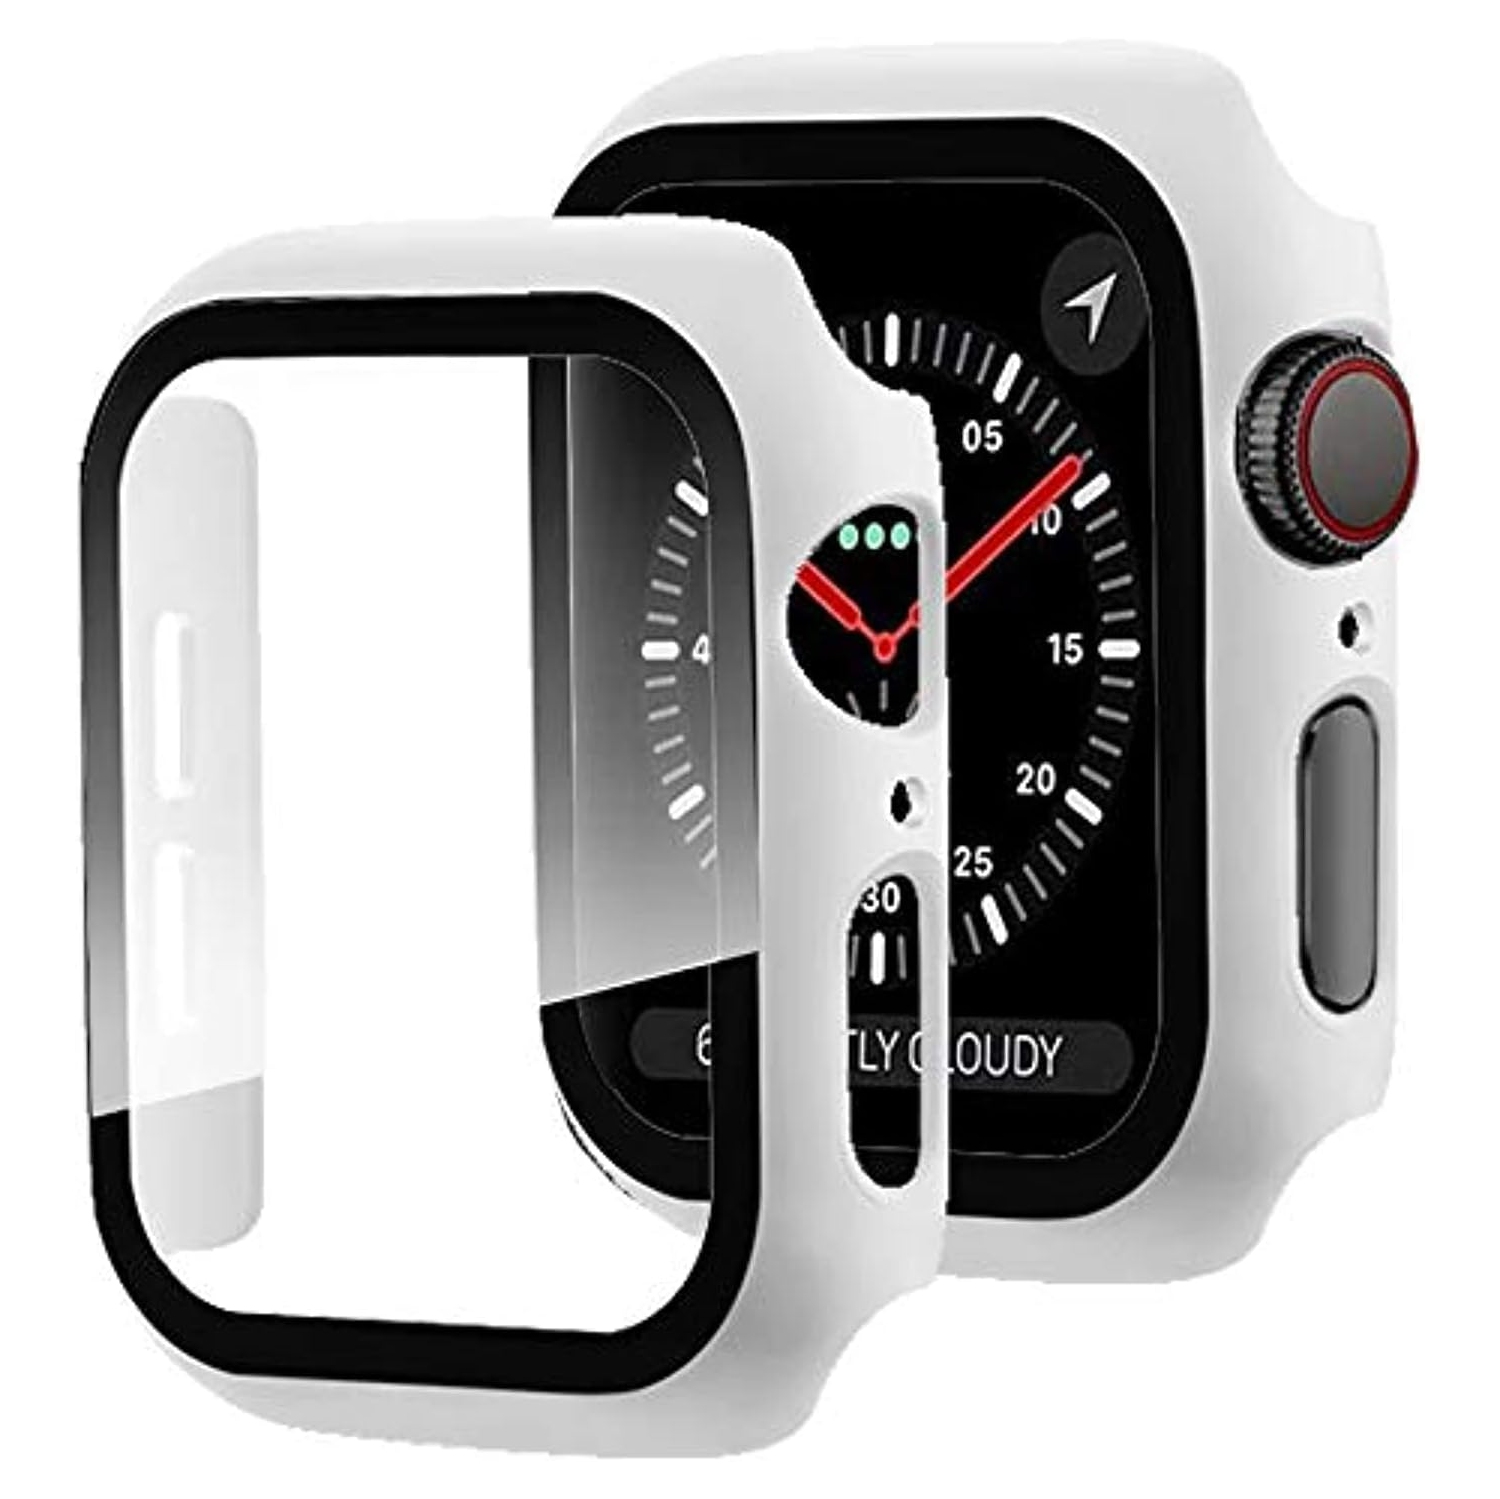 Compatible with Apple Watch Series 3 2 1 42mm Case with Screen Protector, Anti-Scratch Shockproof Matte Hard PC